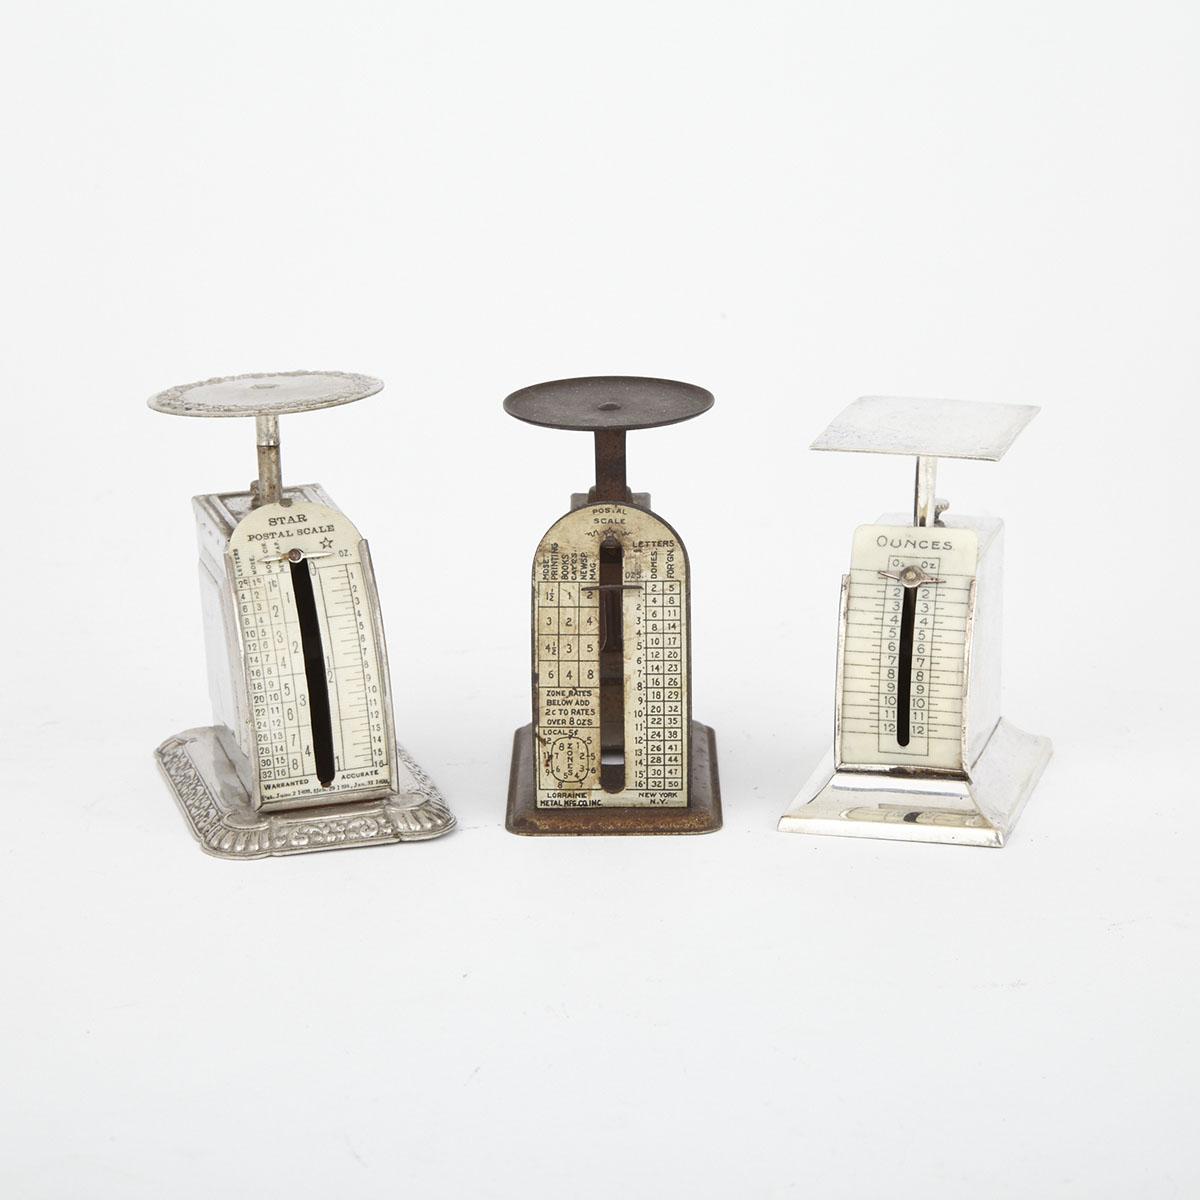 Three Small Desktop Metal Postal Scales, late 19th and early 20th centuries